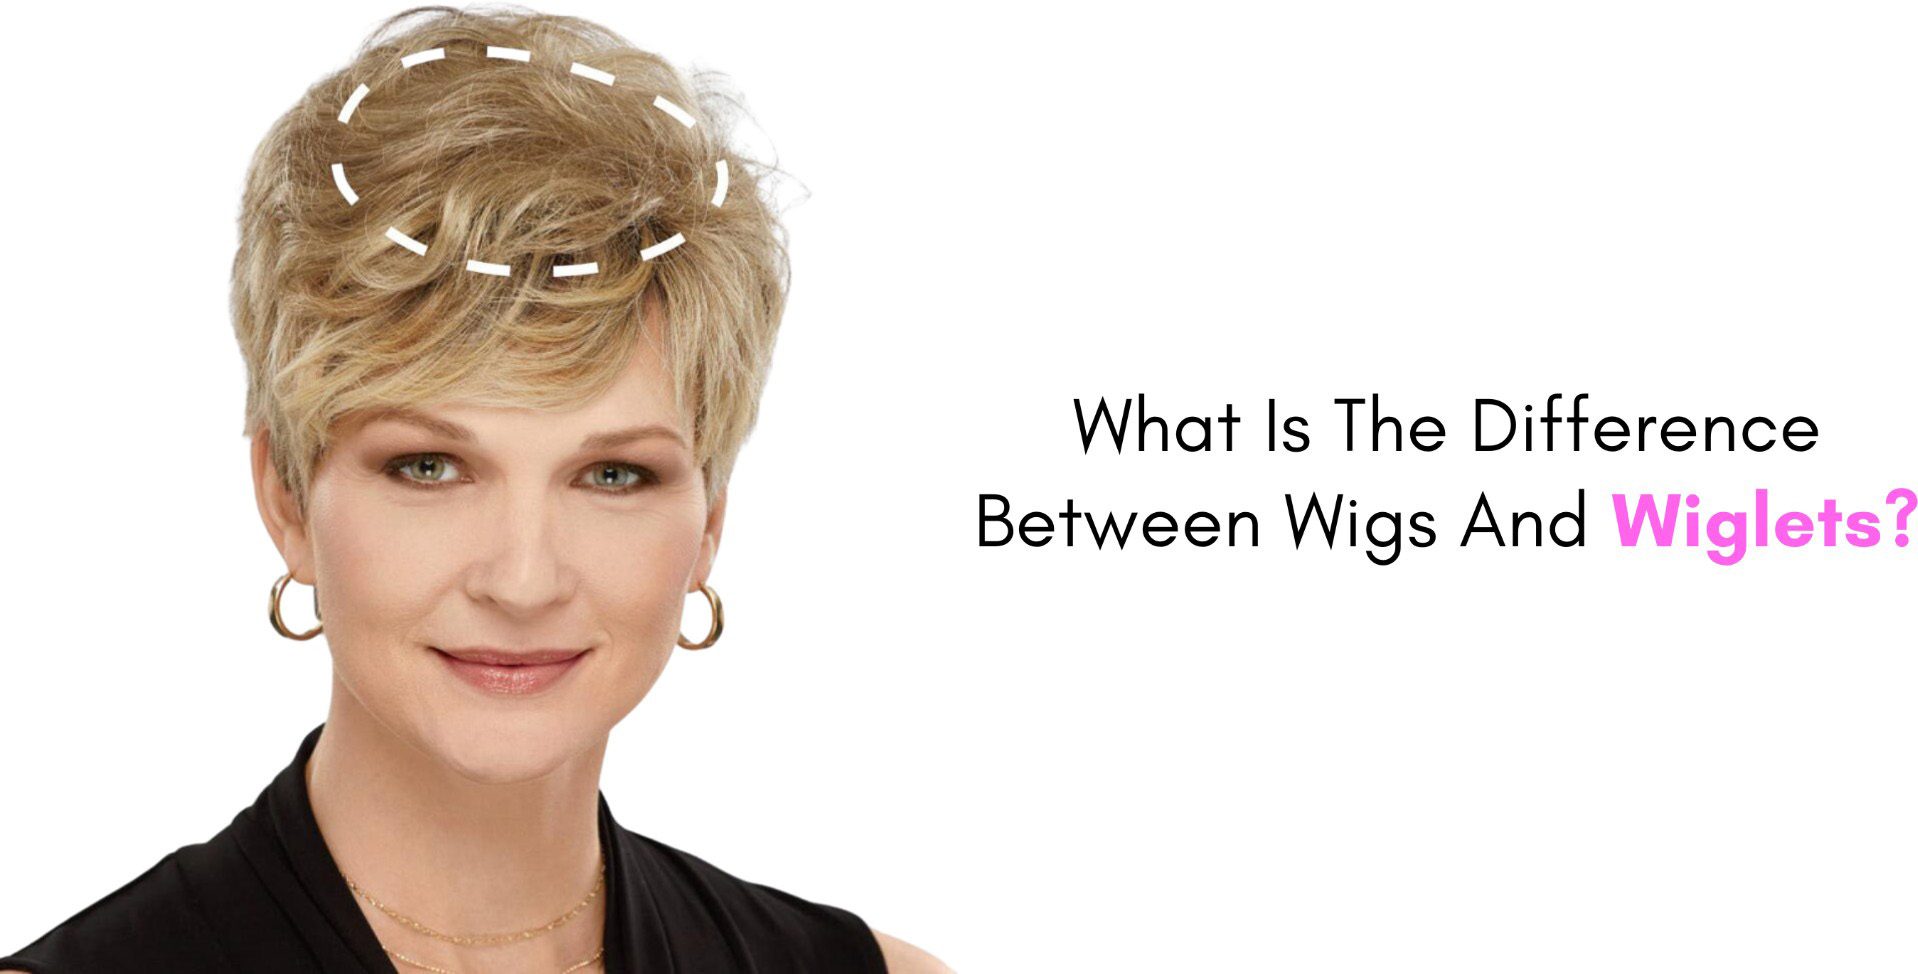 What Is The Difference Between Wigs And Wiglets?